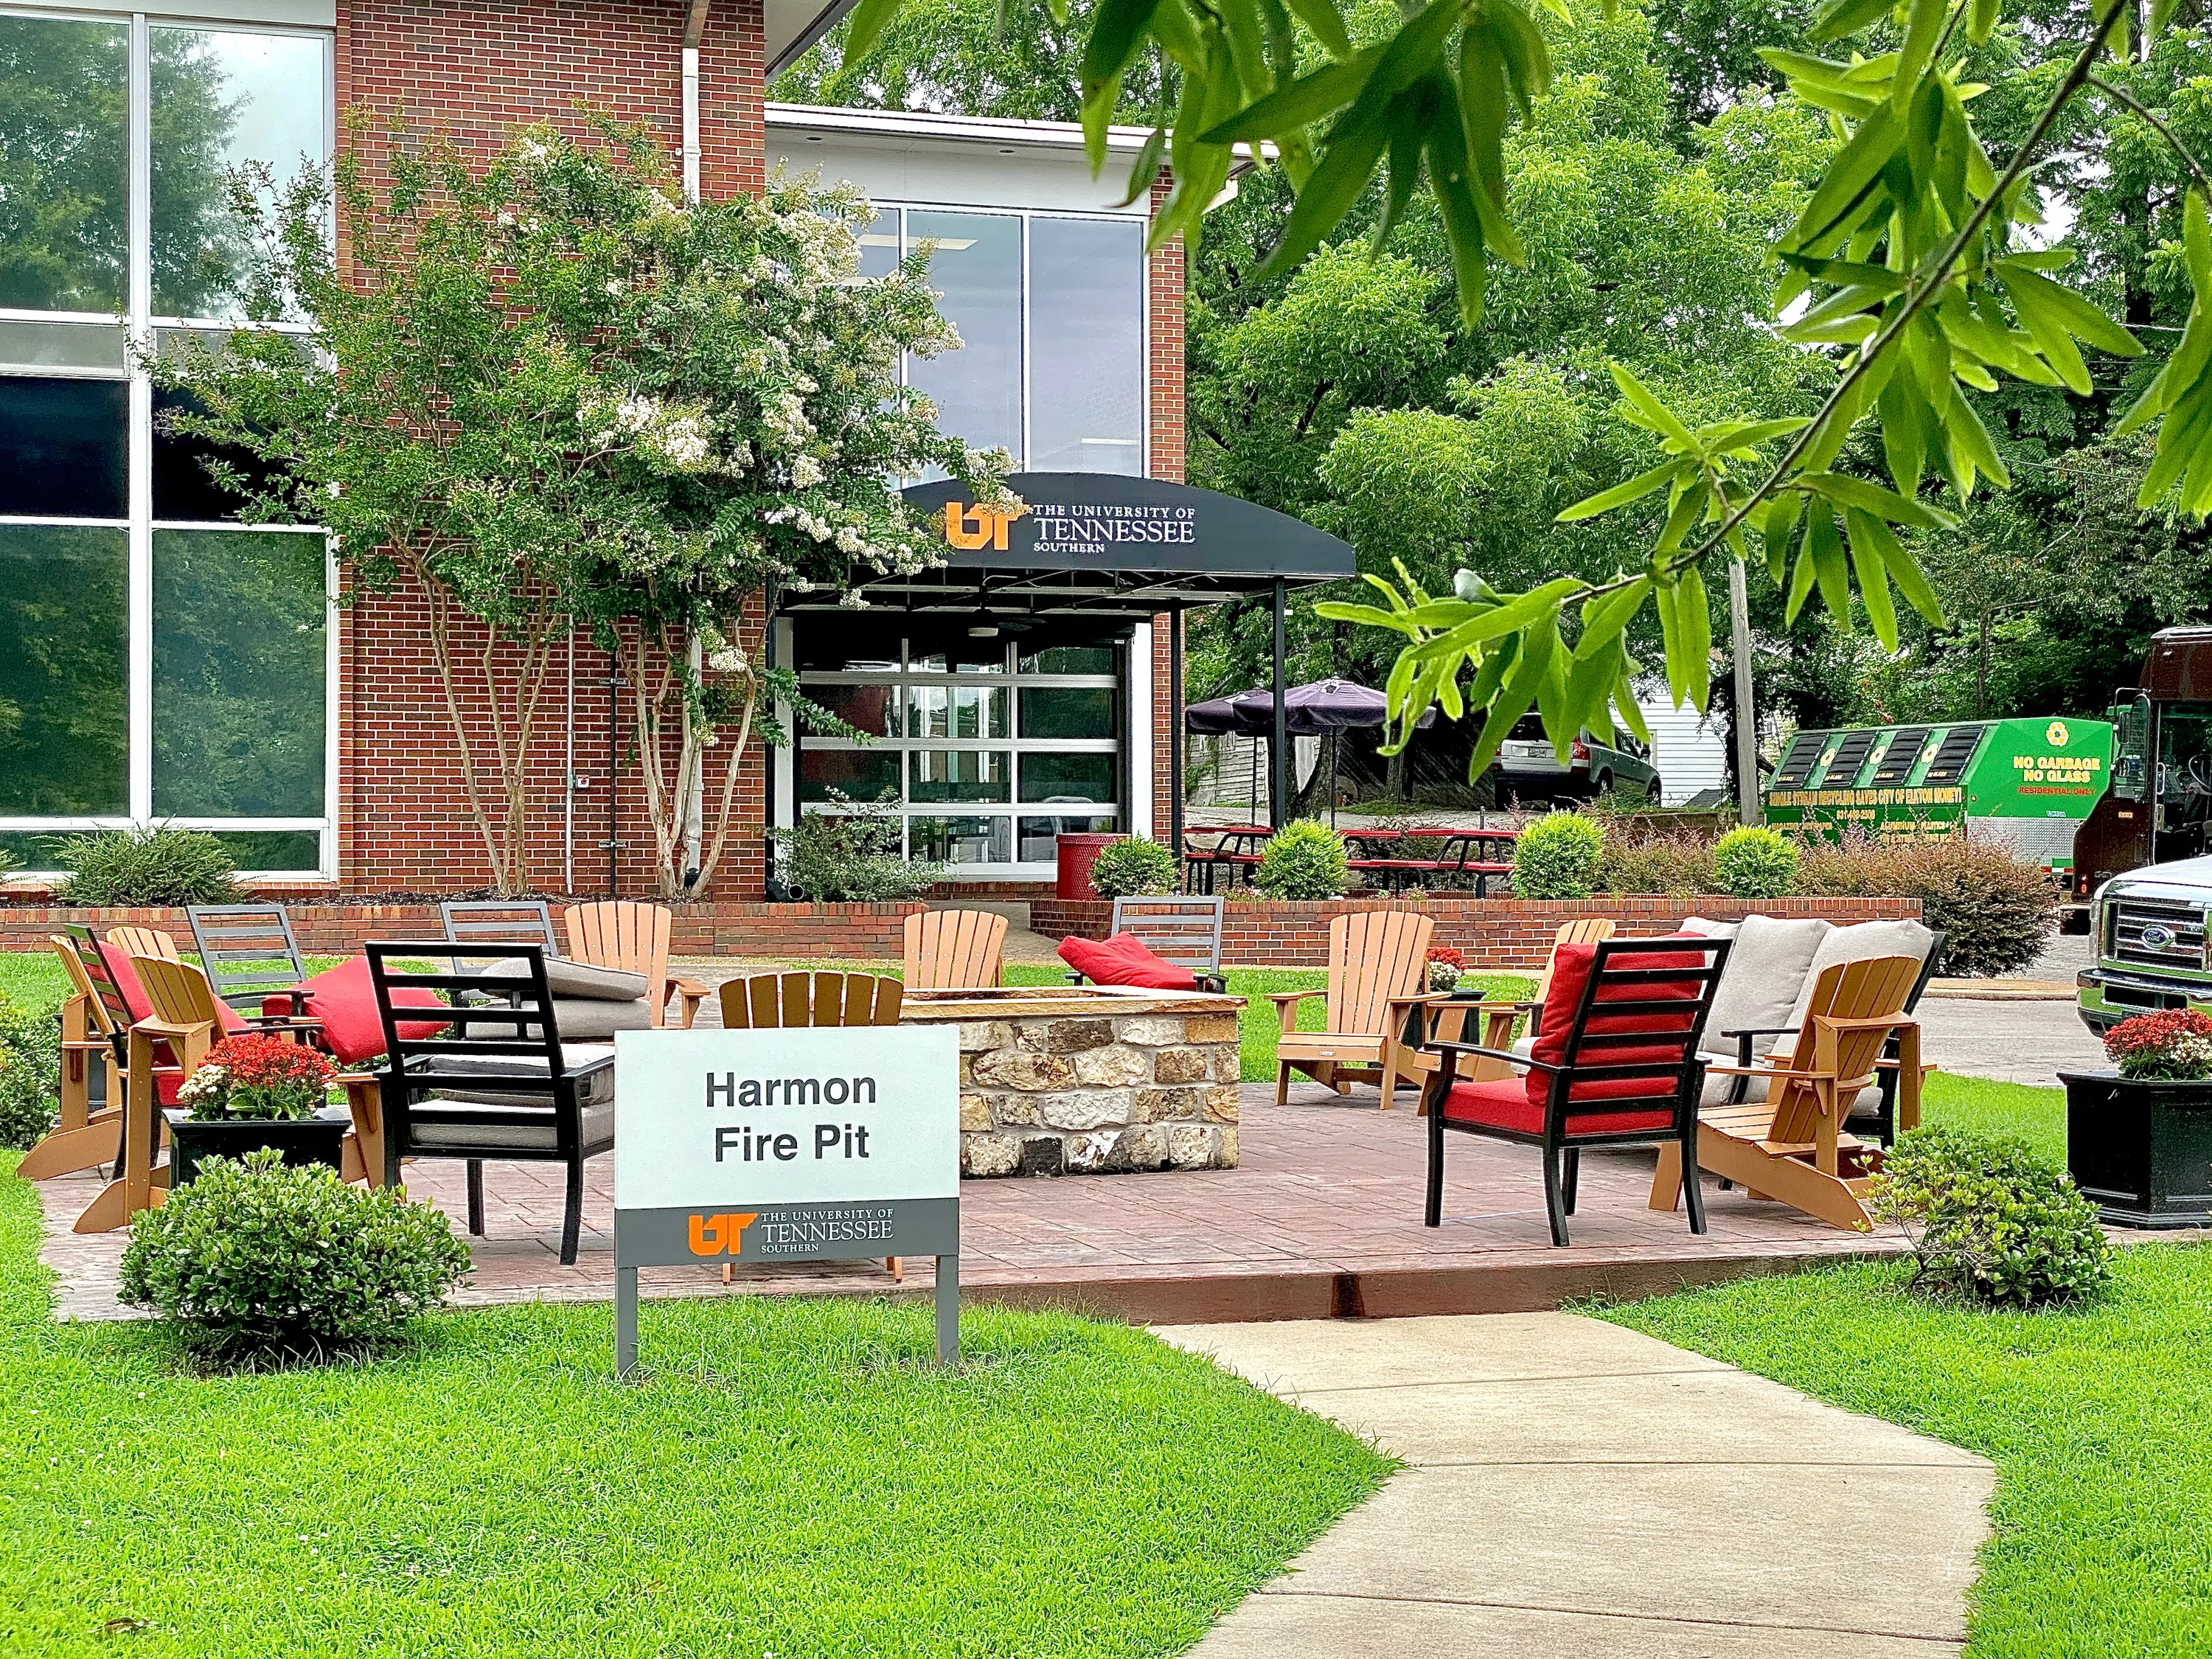 Exterior of Student Union with chairs and Harmon Fire Pit